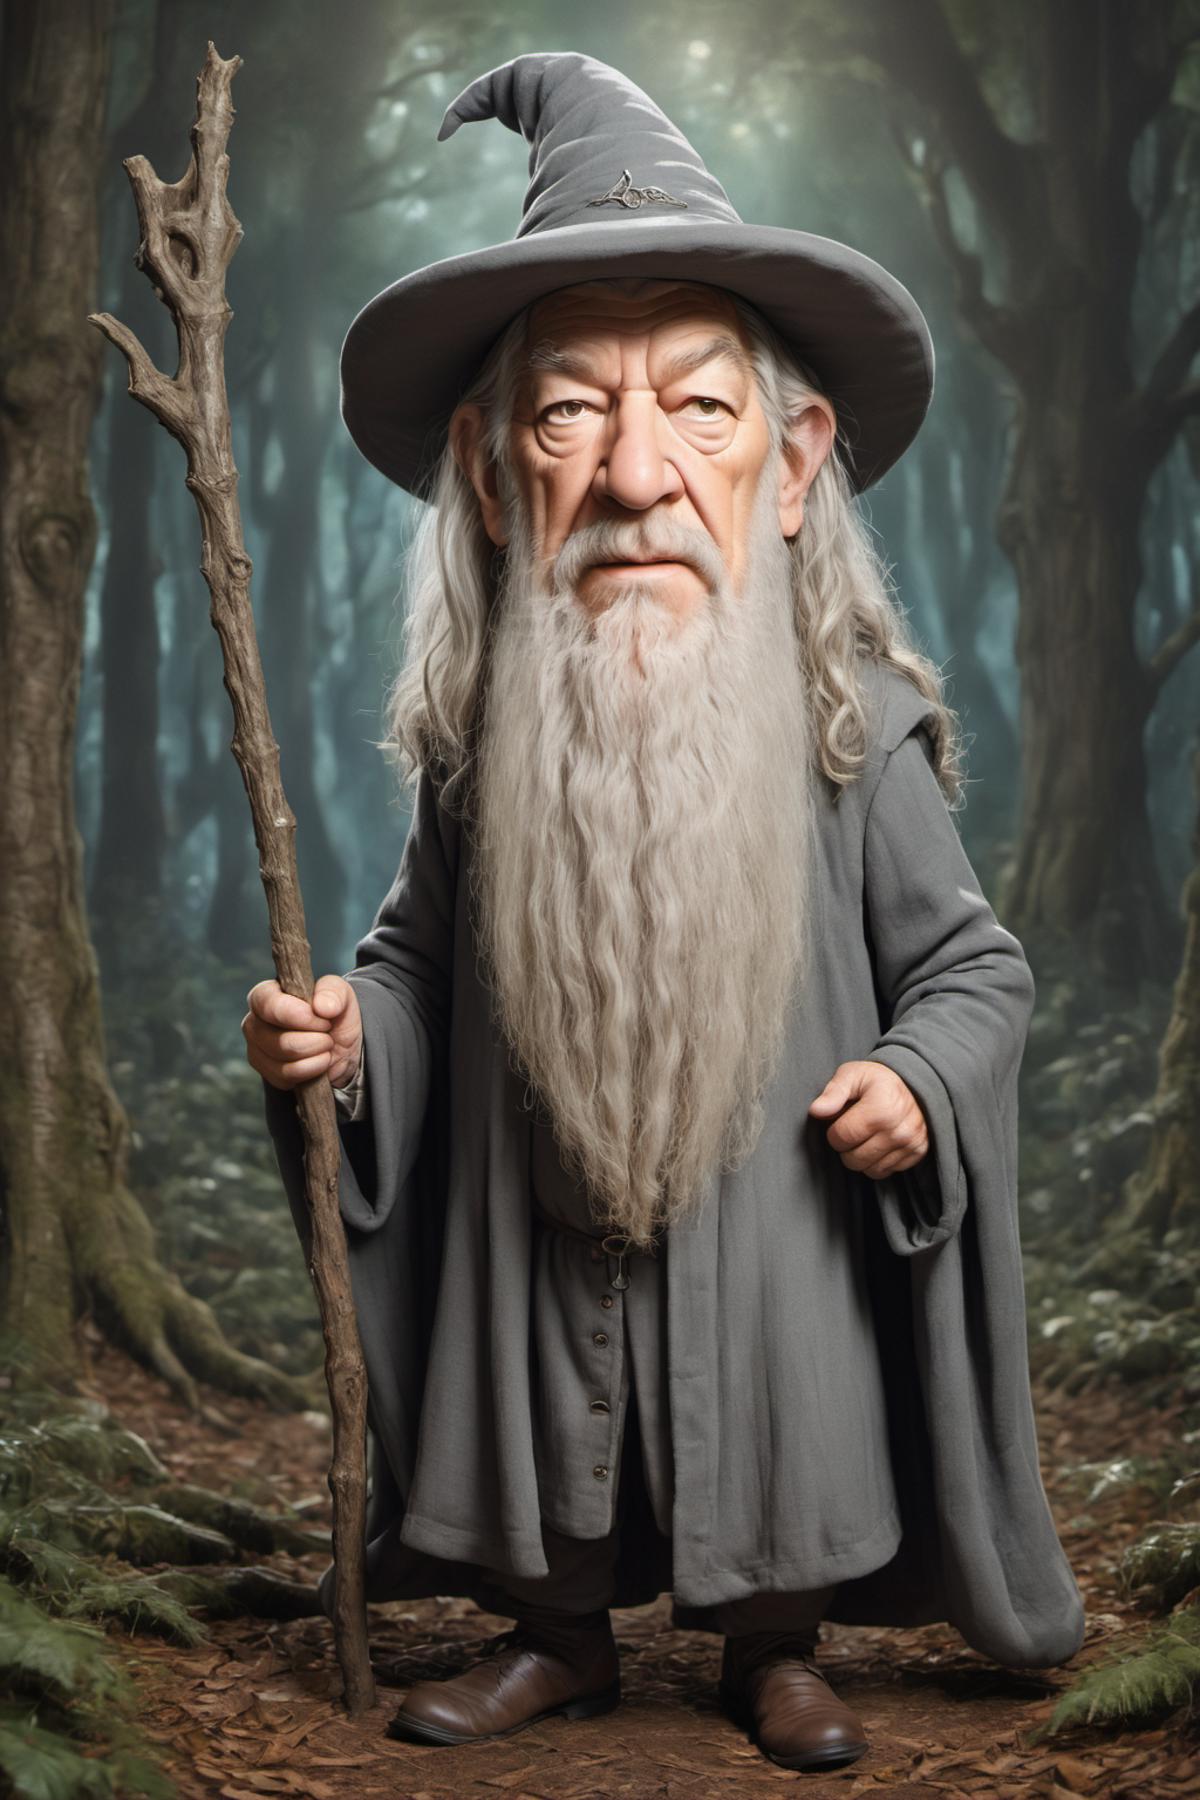 A gray bearded man dressed as Gandalf holds a staff in a forest.